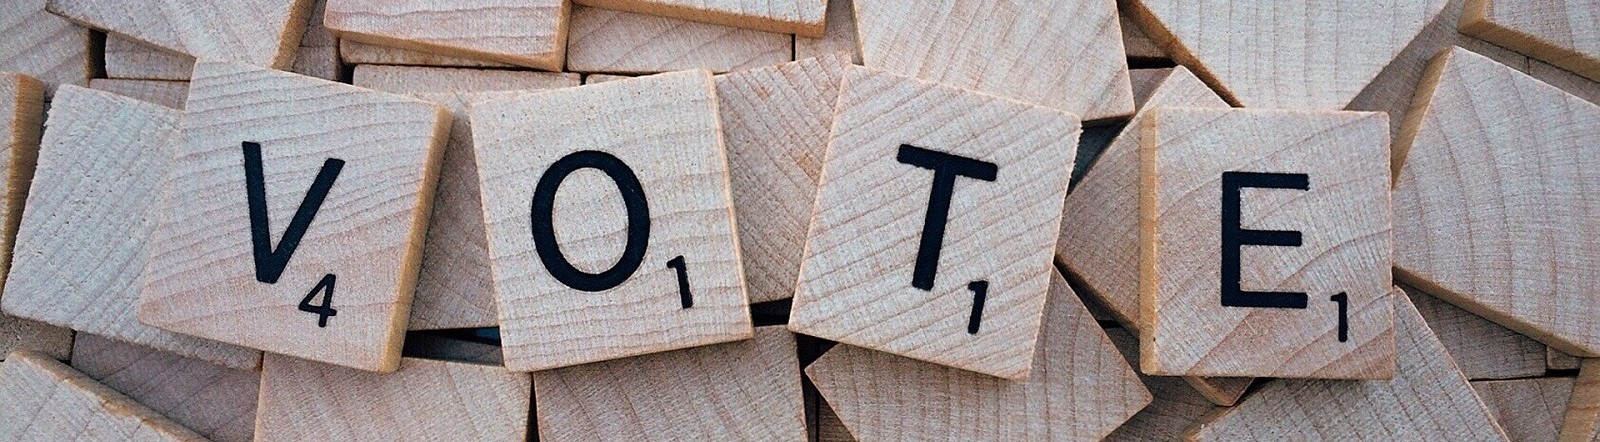 Image by Wokandapix from Pixabay of scrabble pieces spelling "vote"